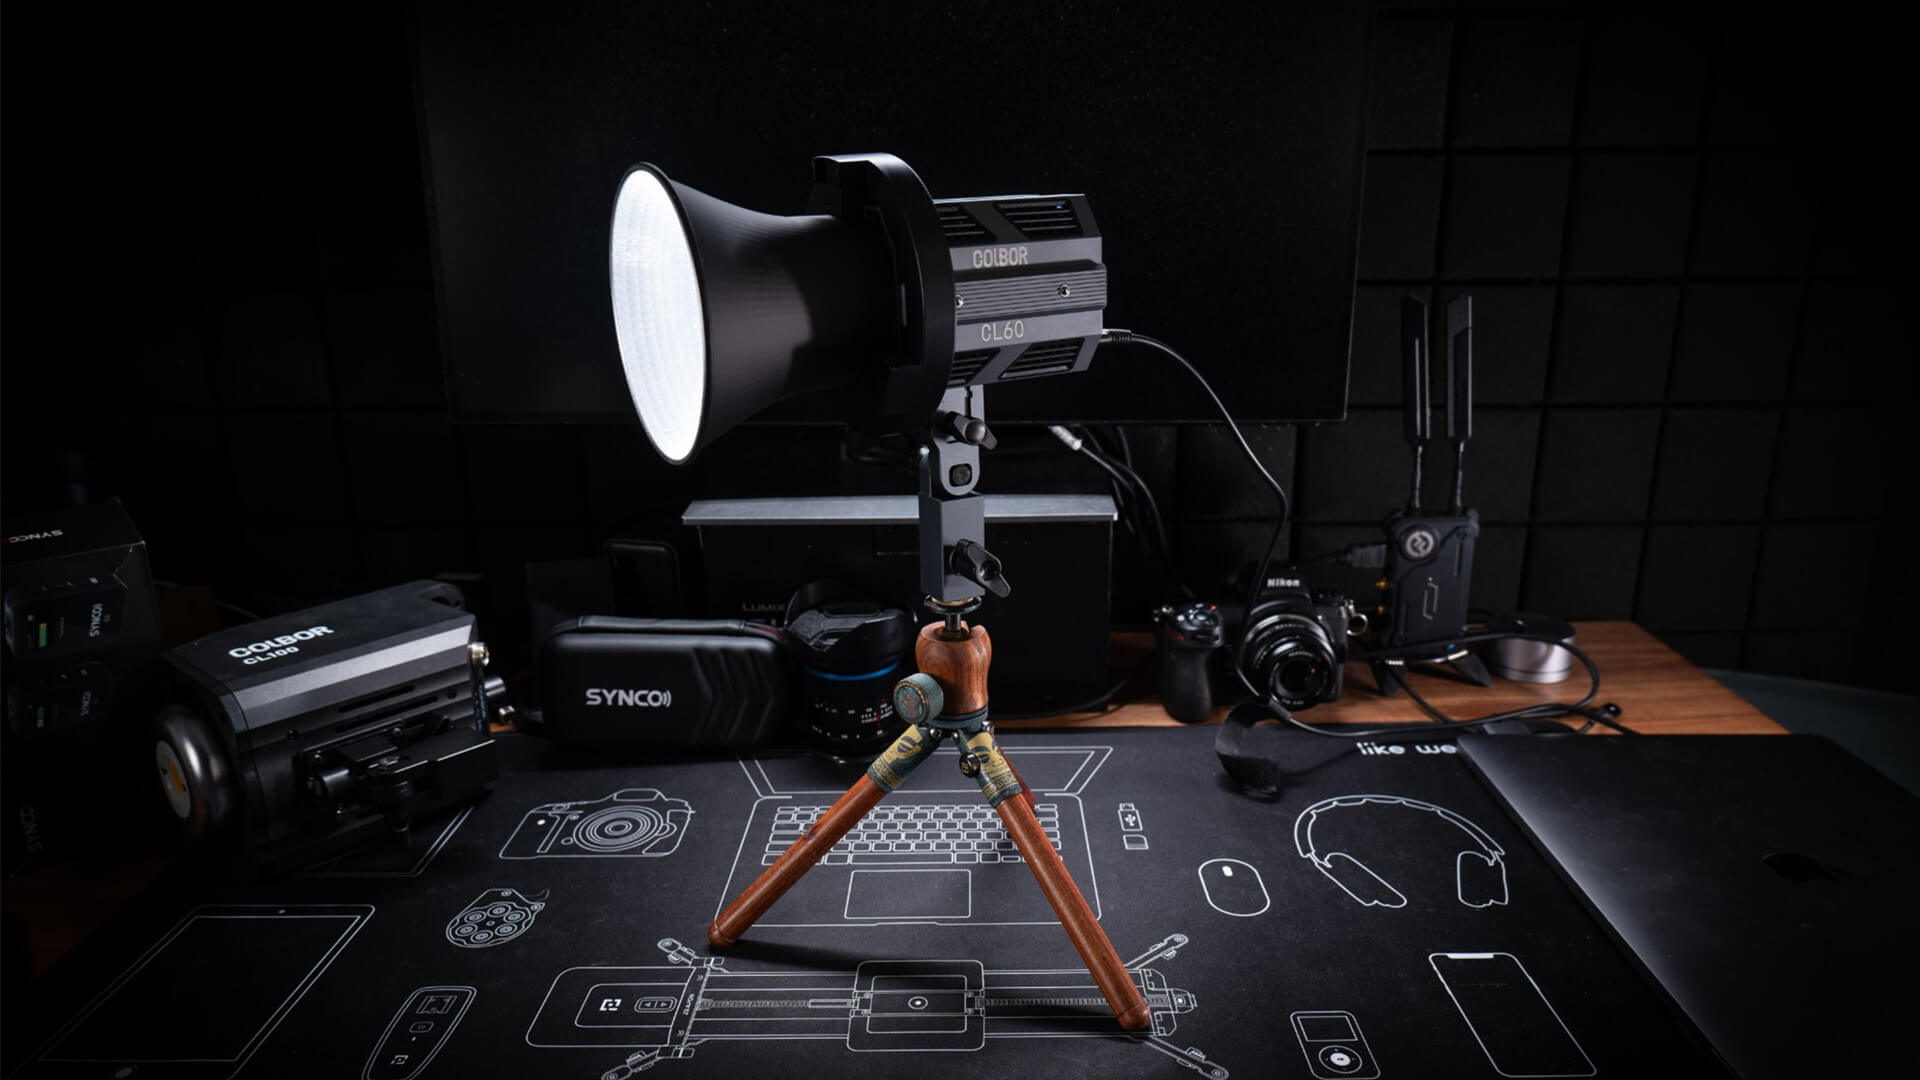 Mount COLBOR CL60 best studio light for video on a tripod